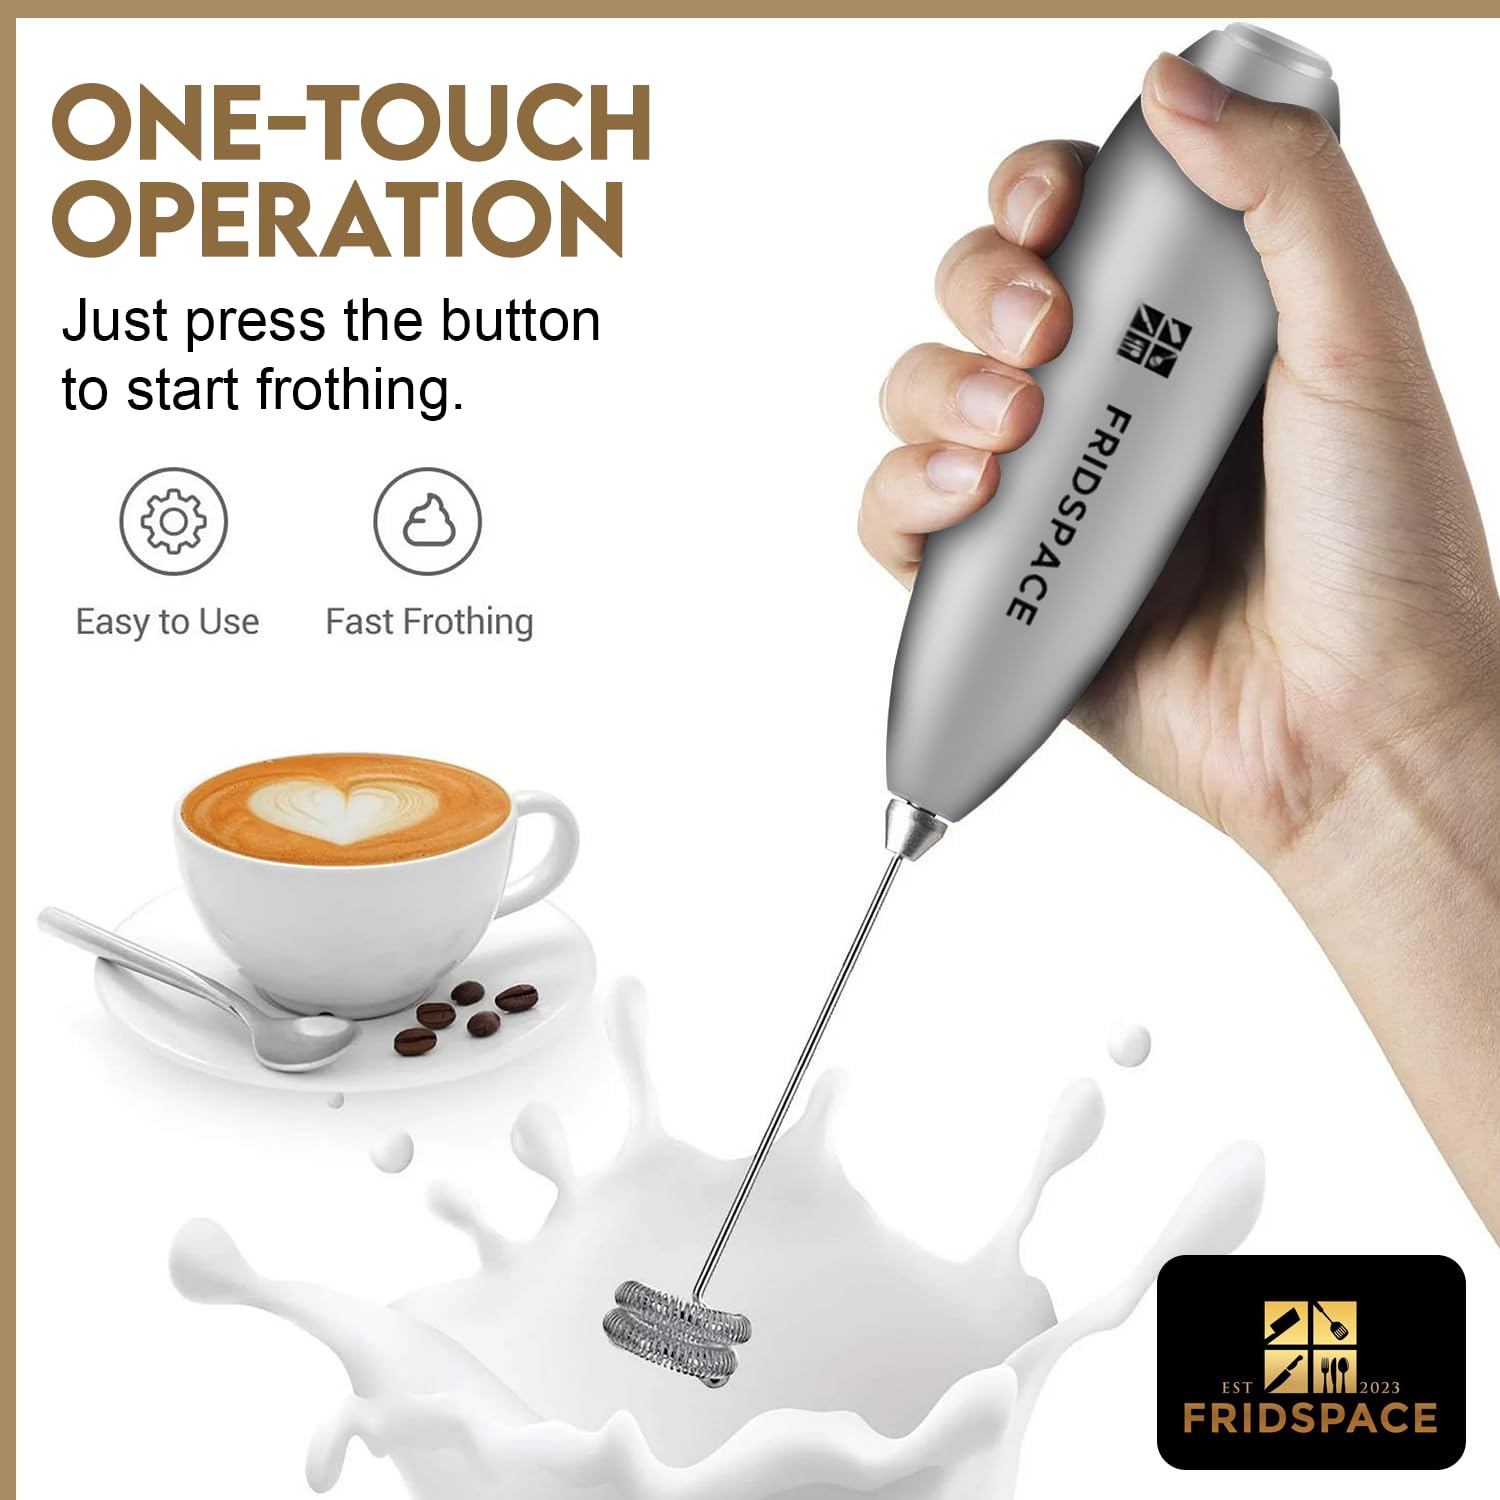 Handheld portable milk frother durable double whisk electric coffee machine, battery operated stainless steel milk mixer with stand, instant foam maker for latte, cappuccino, hot chocolate, Frappe